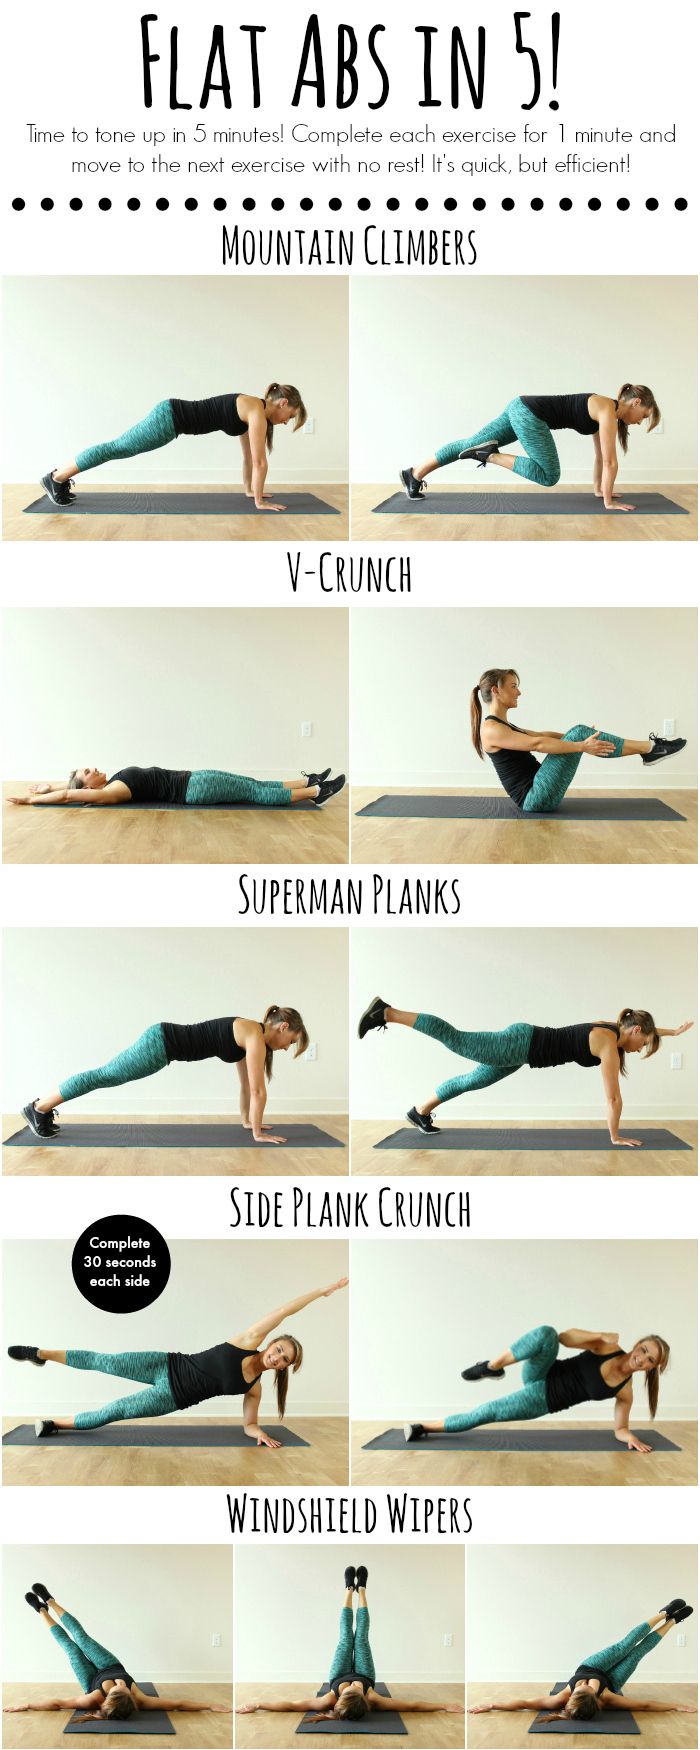 13 Flat Stomach Ab Workouts That Help Shape & Define Your Core